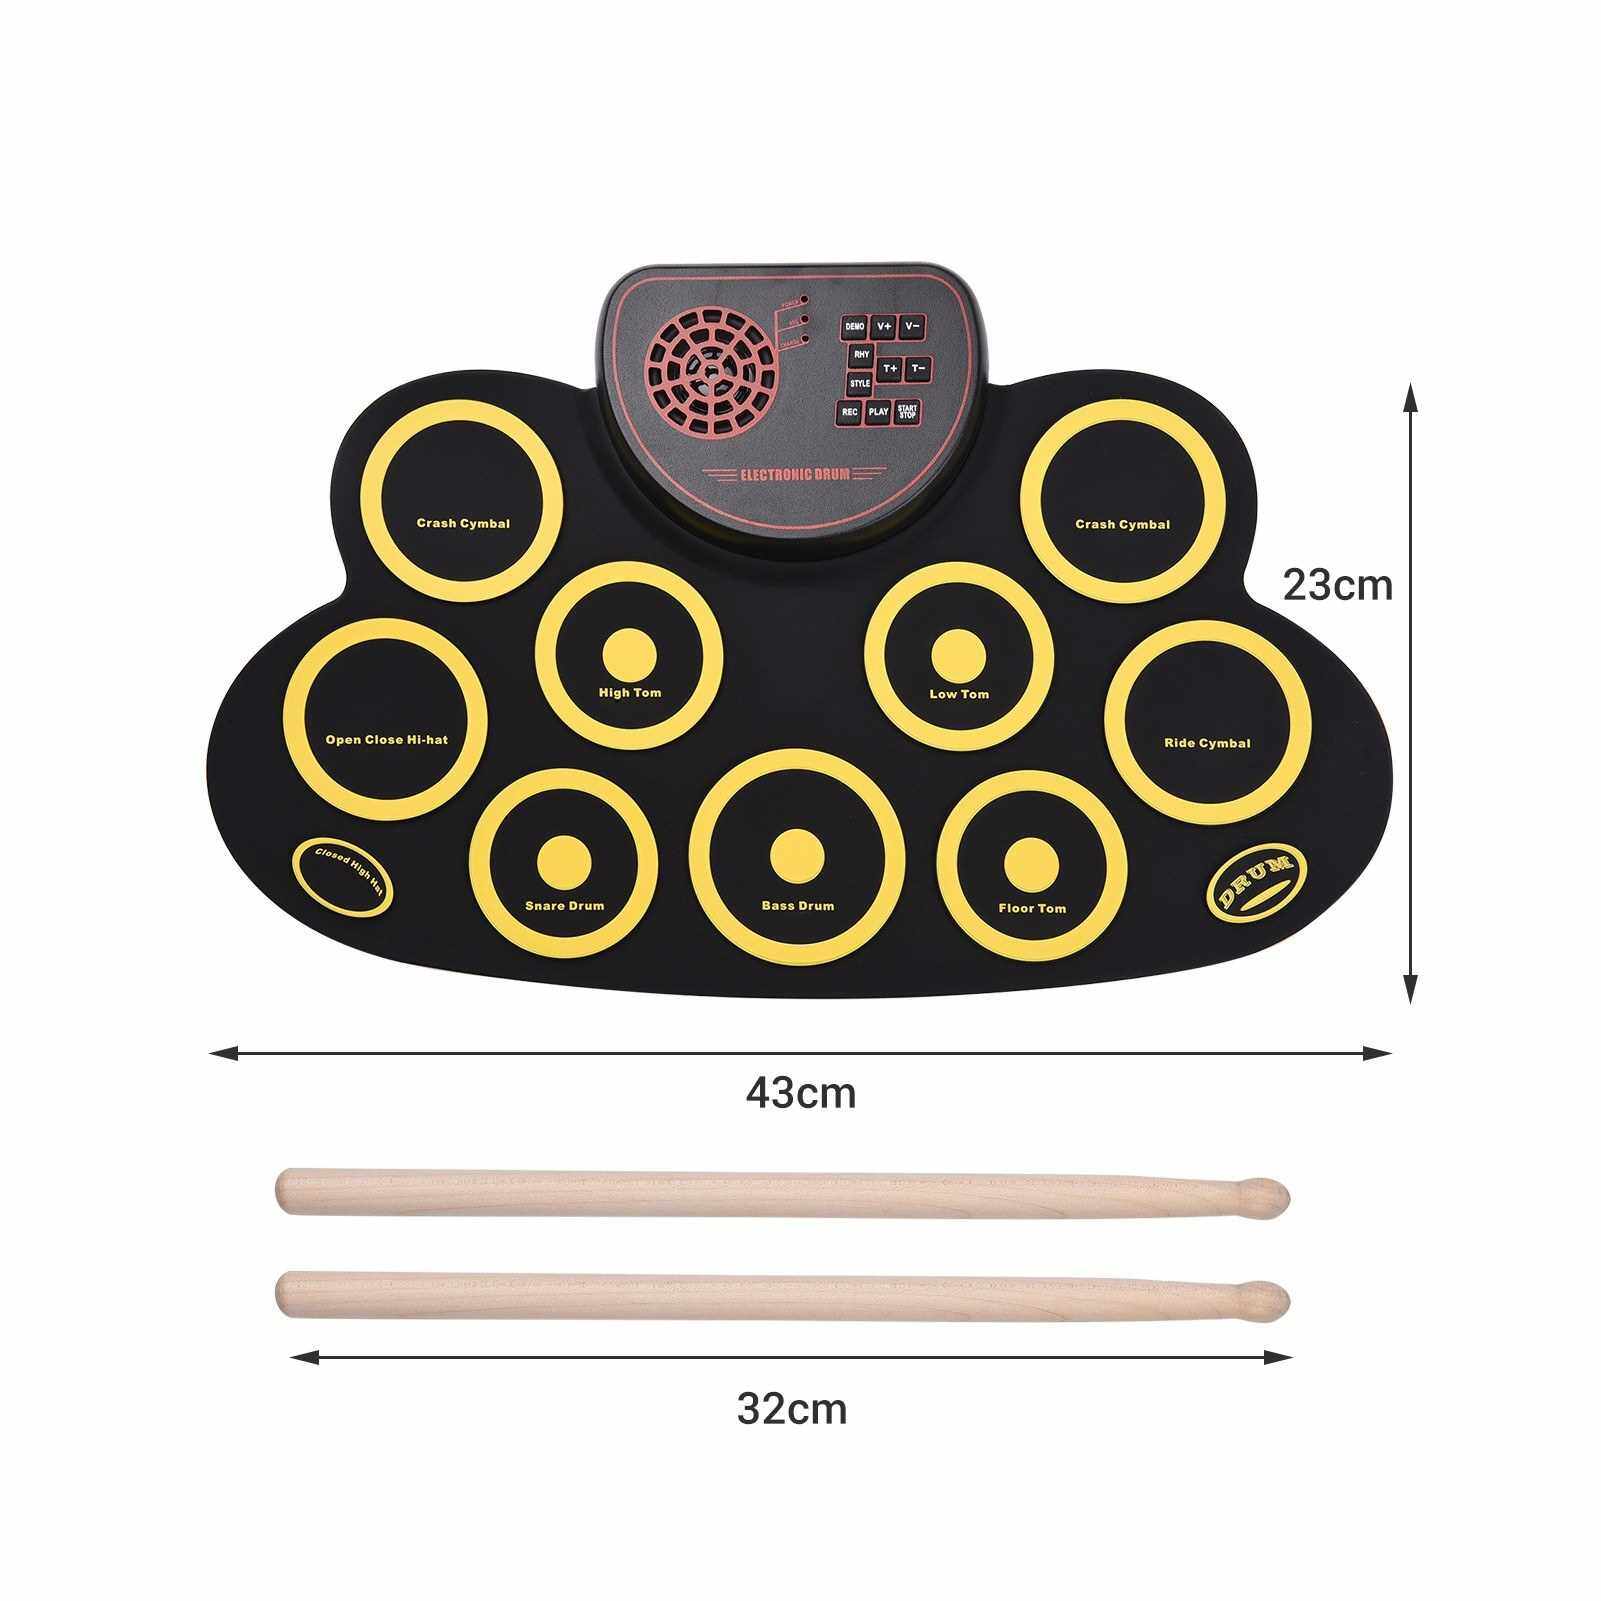 Portable Folding Electronic Drum Pad Silicon Digital Drum 9 Demo Songs 10 Rhythms Record 3.5mm Microphone Input Headphone Monitoring External Speaker Output with Foot Pedals Drum Sticks (Standard)